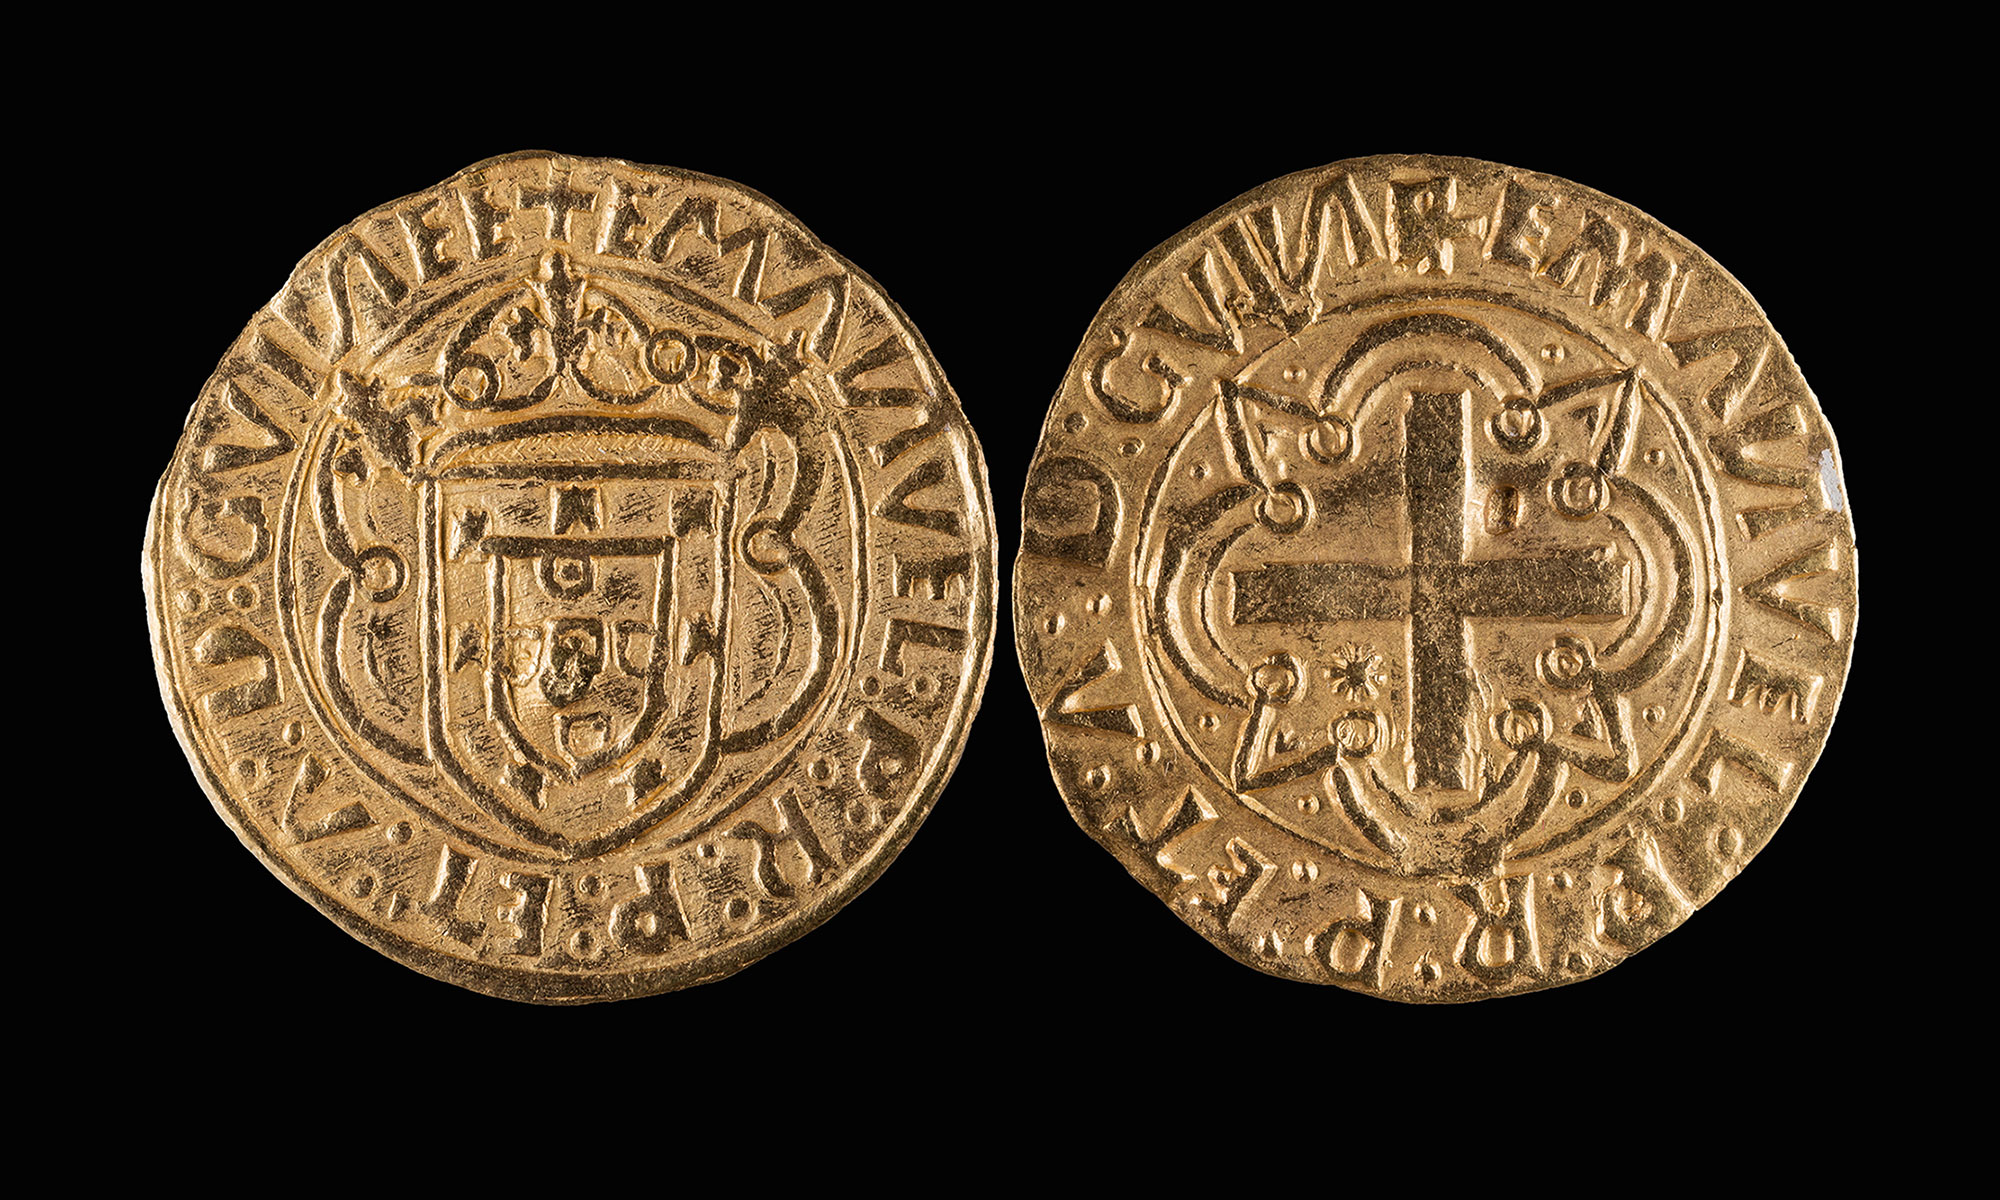 Gold cruzado coins minted in Lisbon between 1495 and 1501